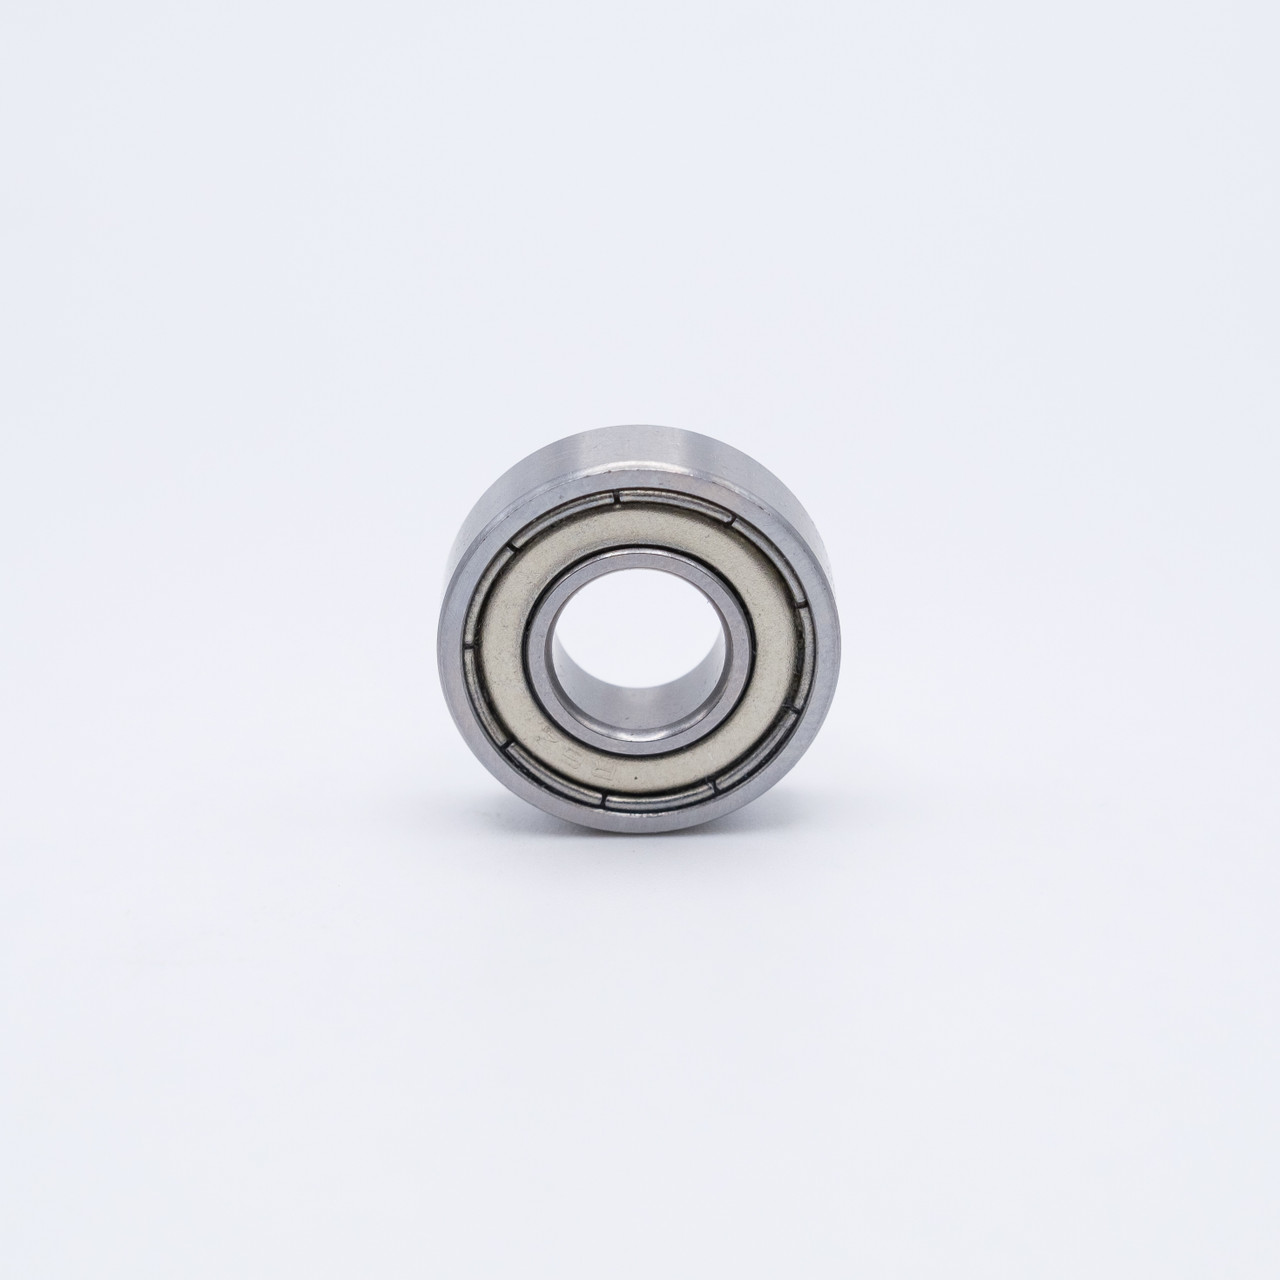 SS6003-ZZ Stainless Steel Ball Bearing 17x35x10mm Front View